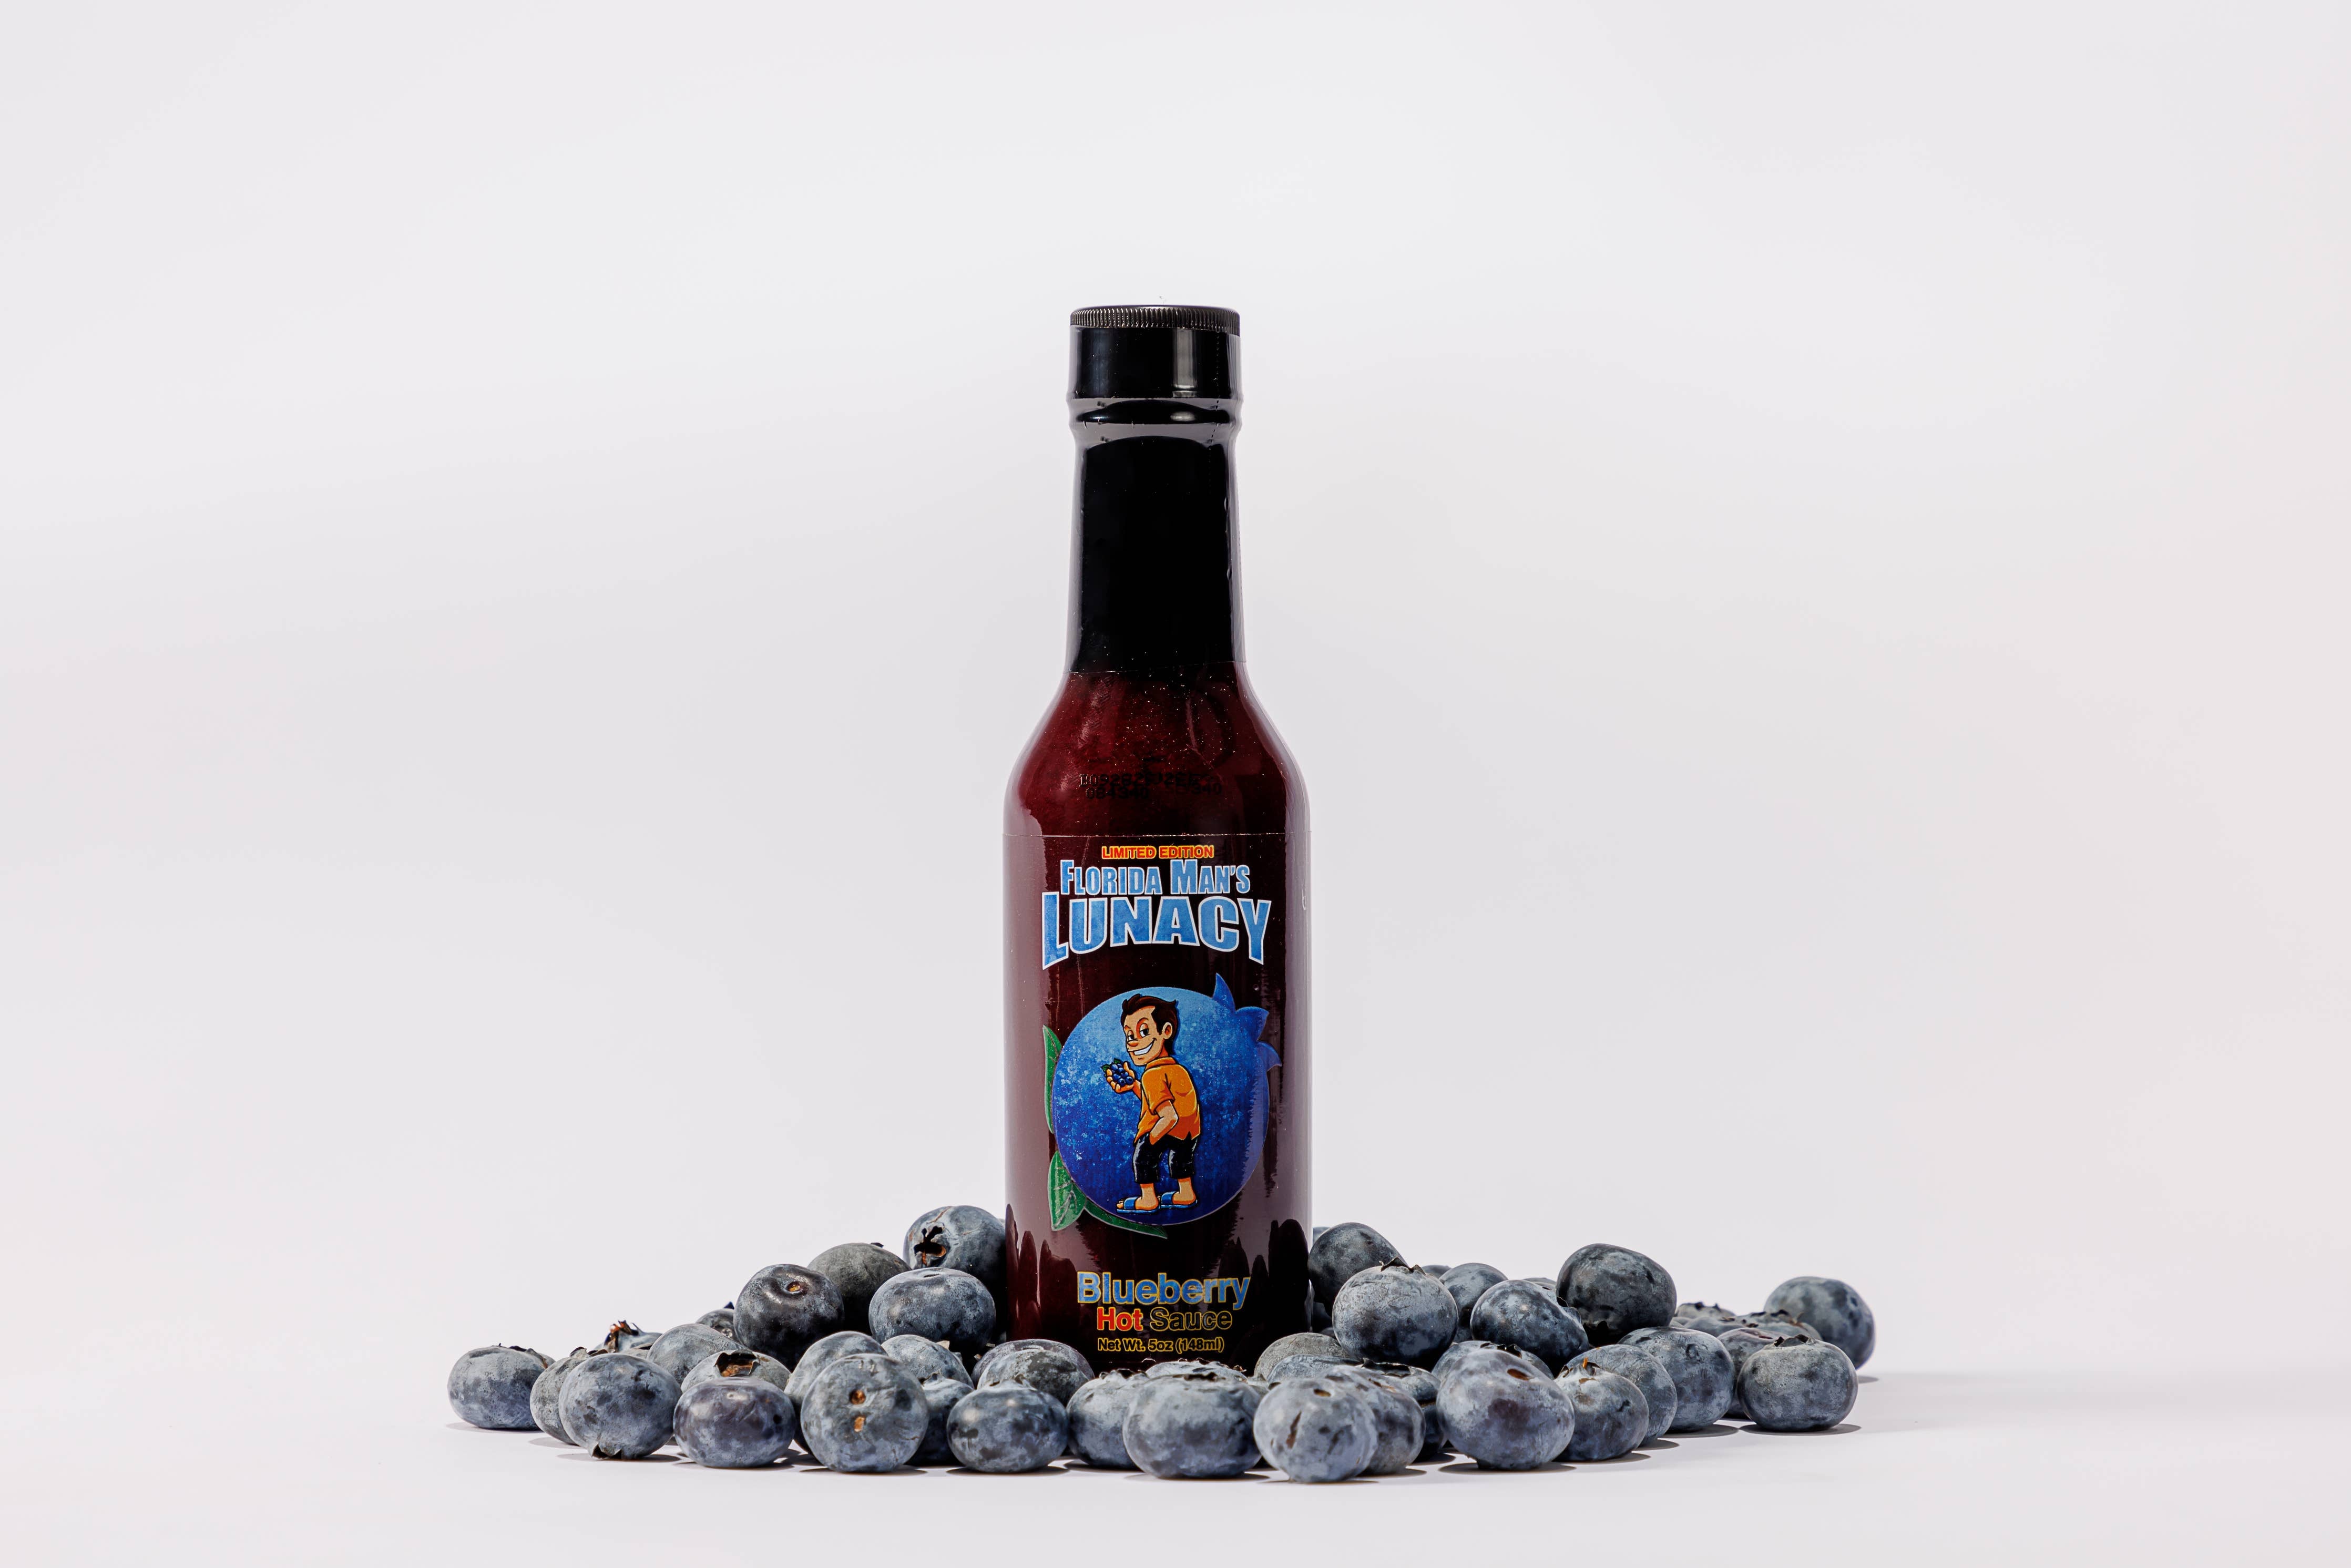 Florida Man's Lunacy Blueberry Hot Sauce- LIMITED EDITION